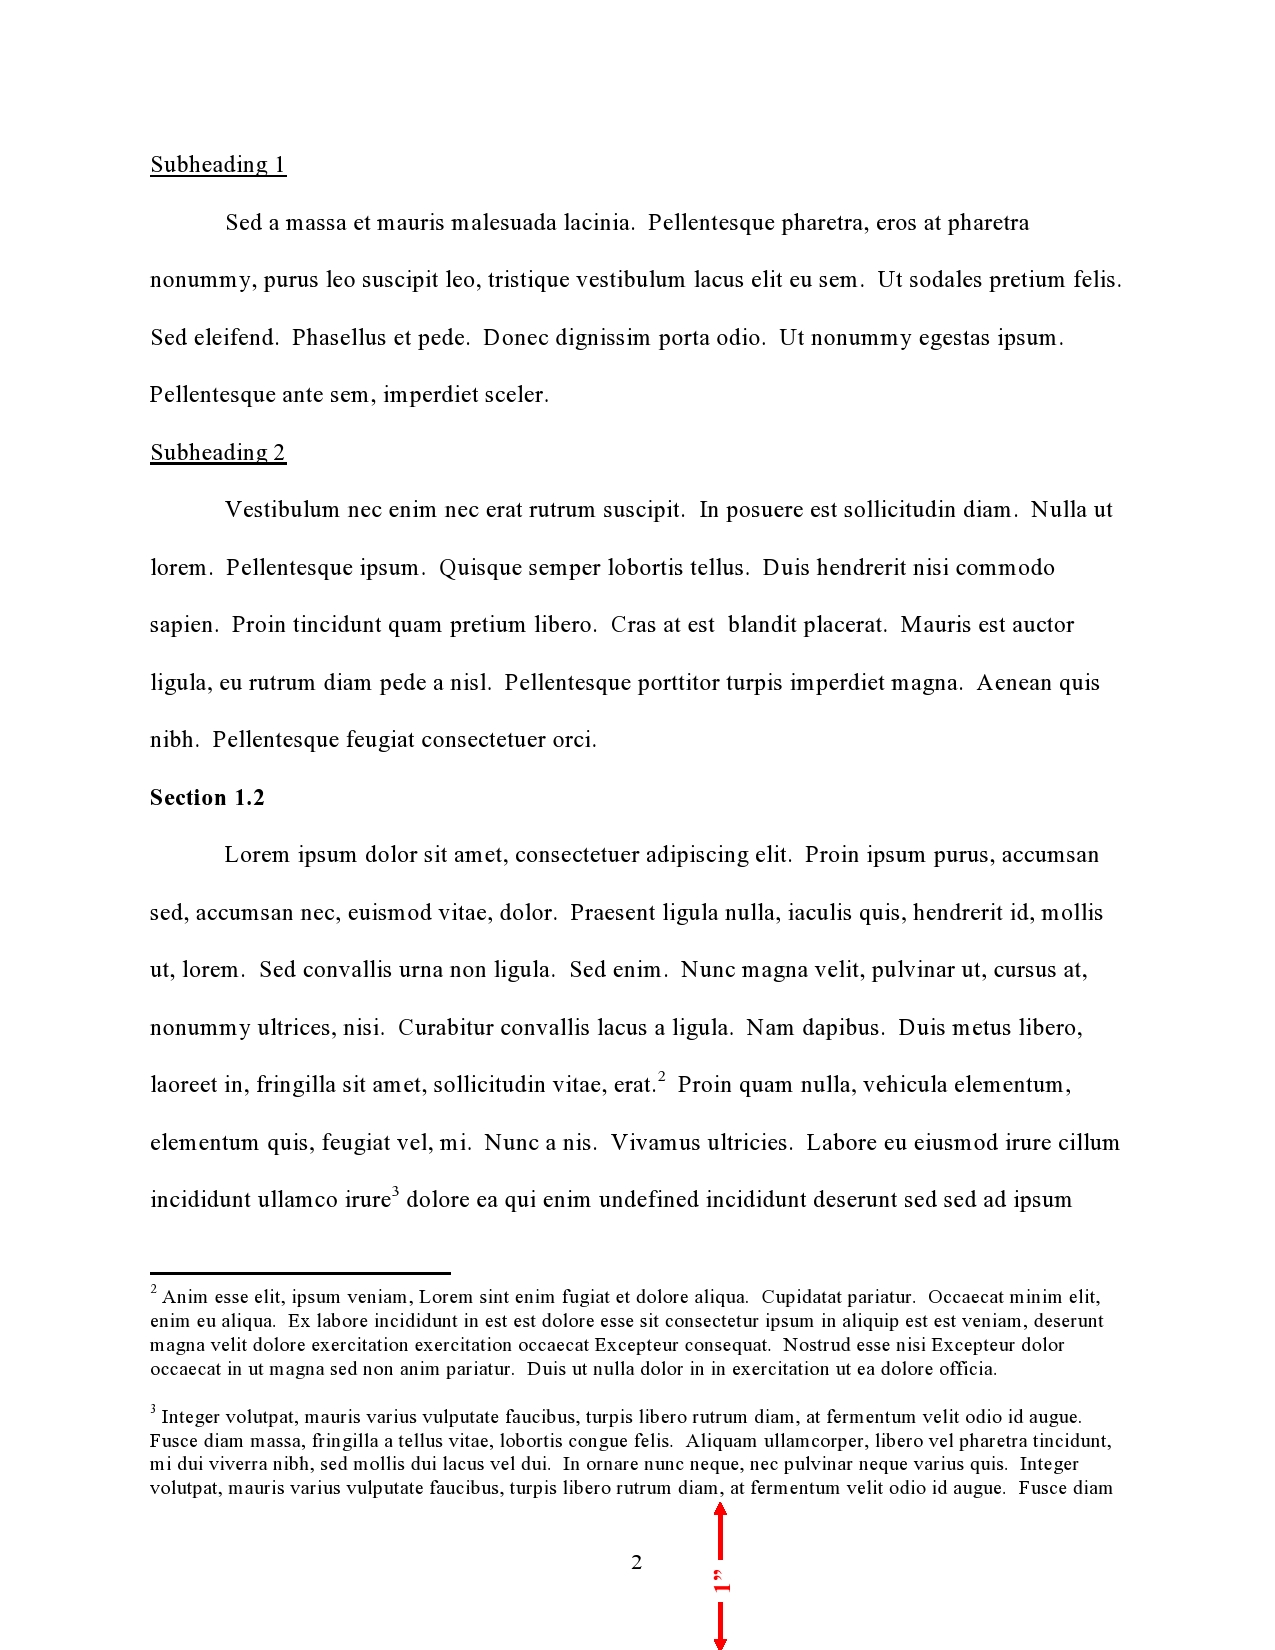 Defending dissertation education in psychology thesis writing